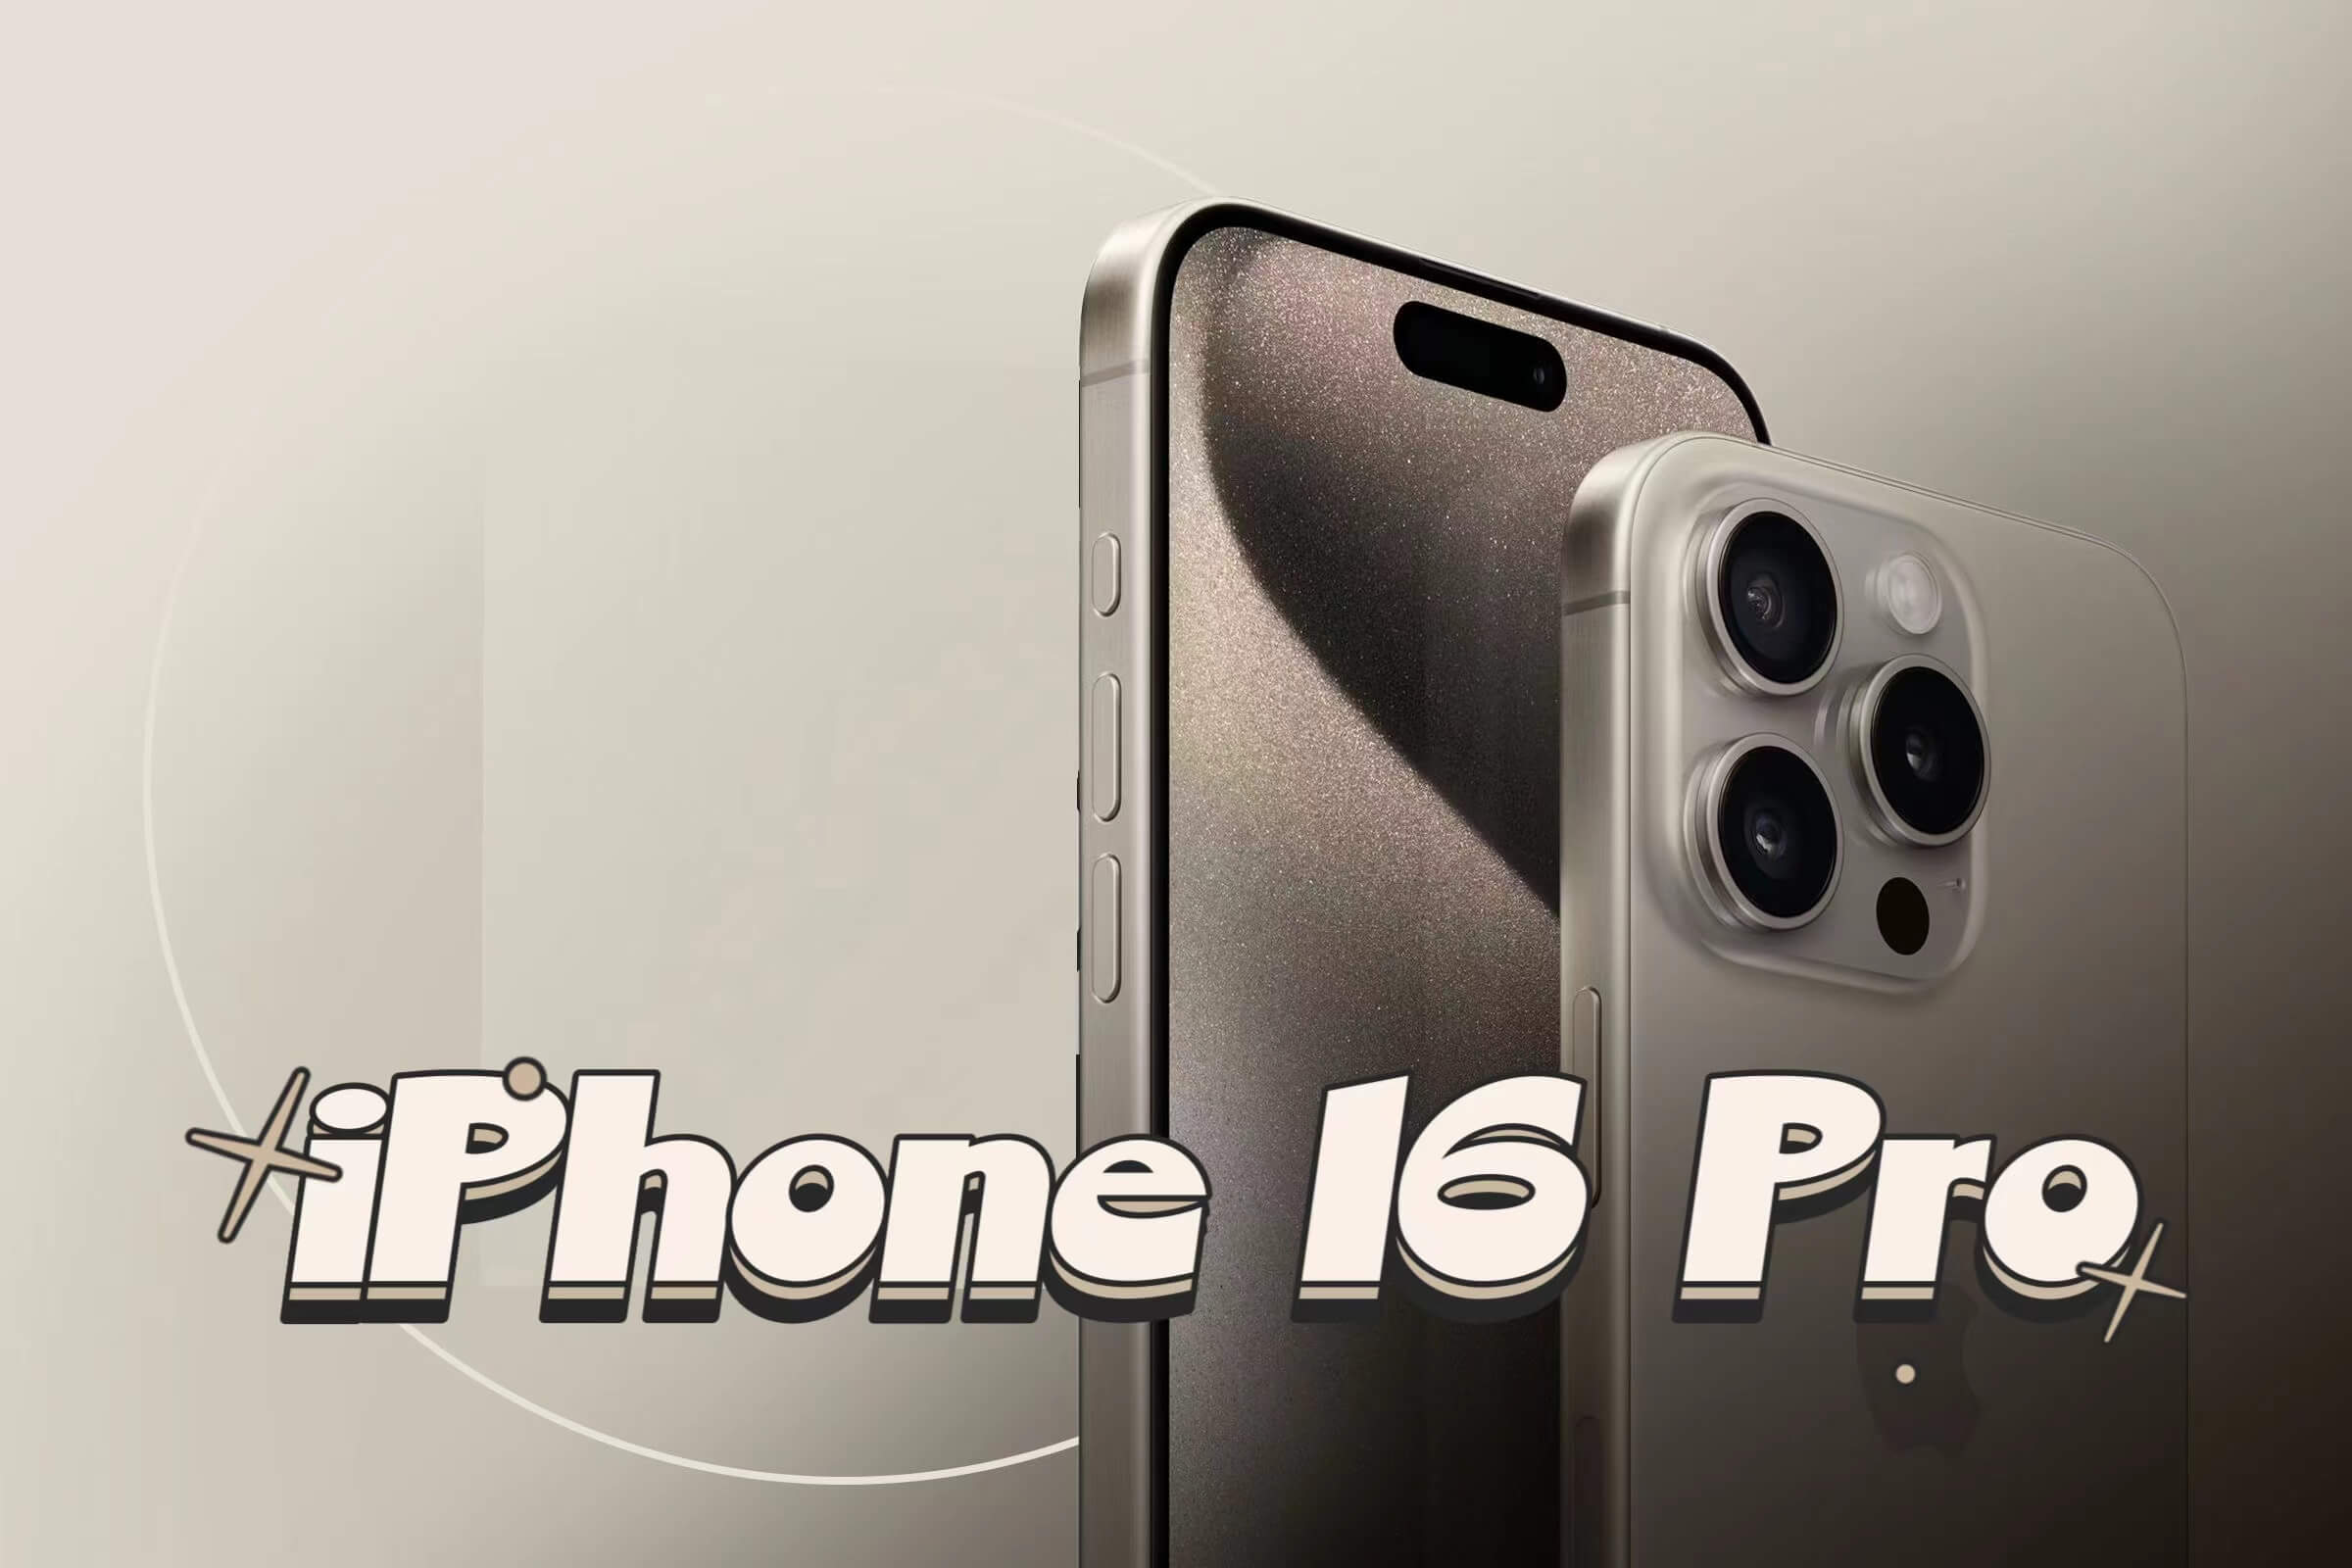 iPhone 16 Pro and iPhone 16 Pro Max: What will be updated?